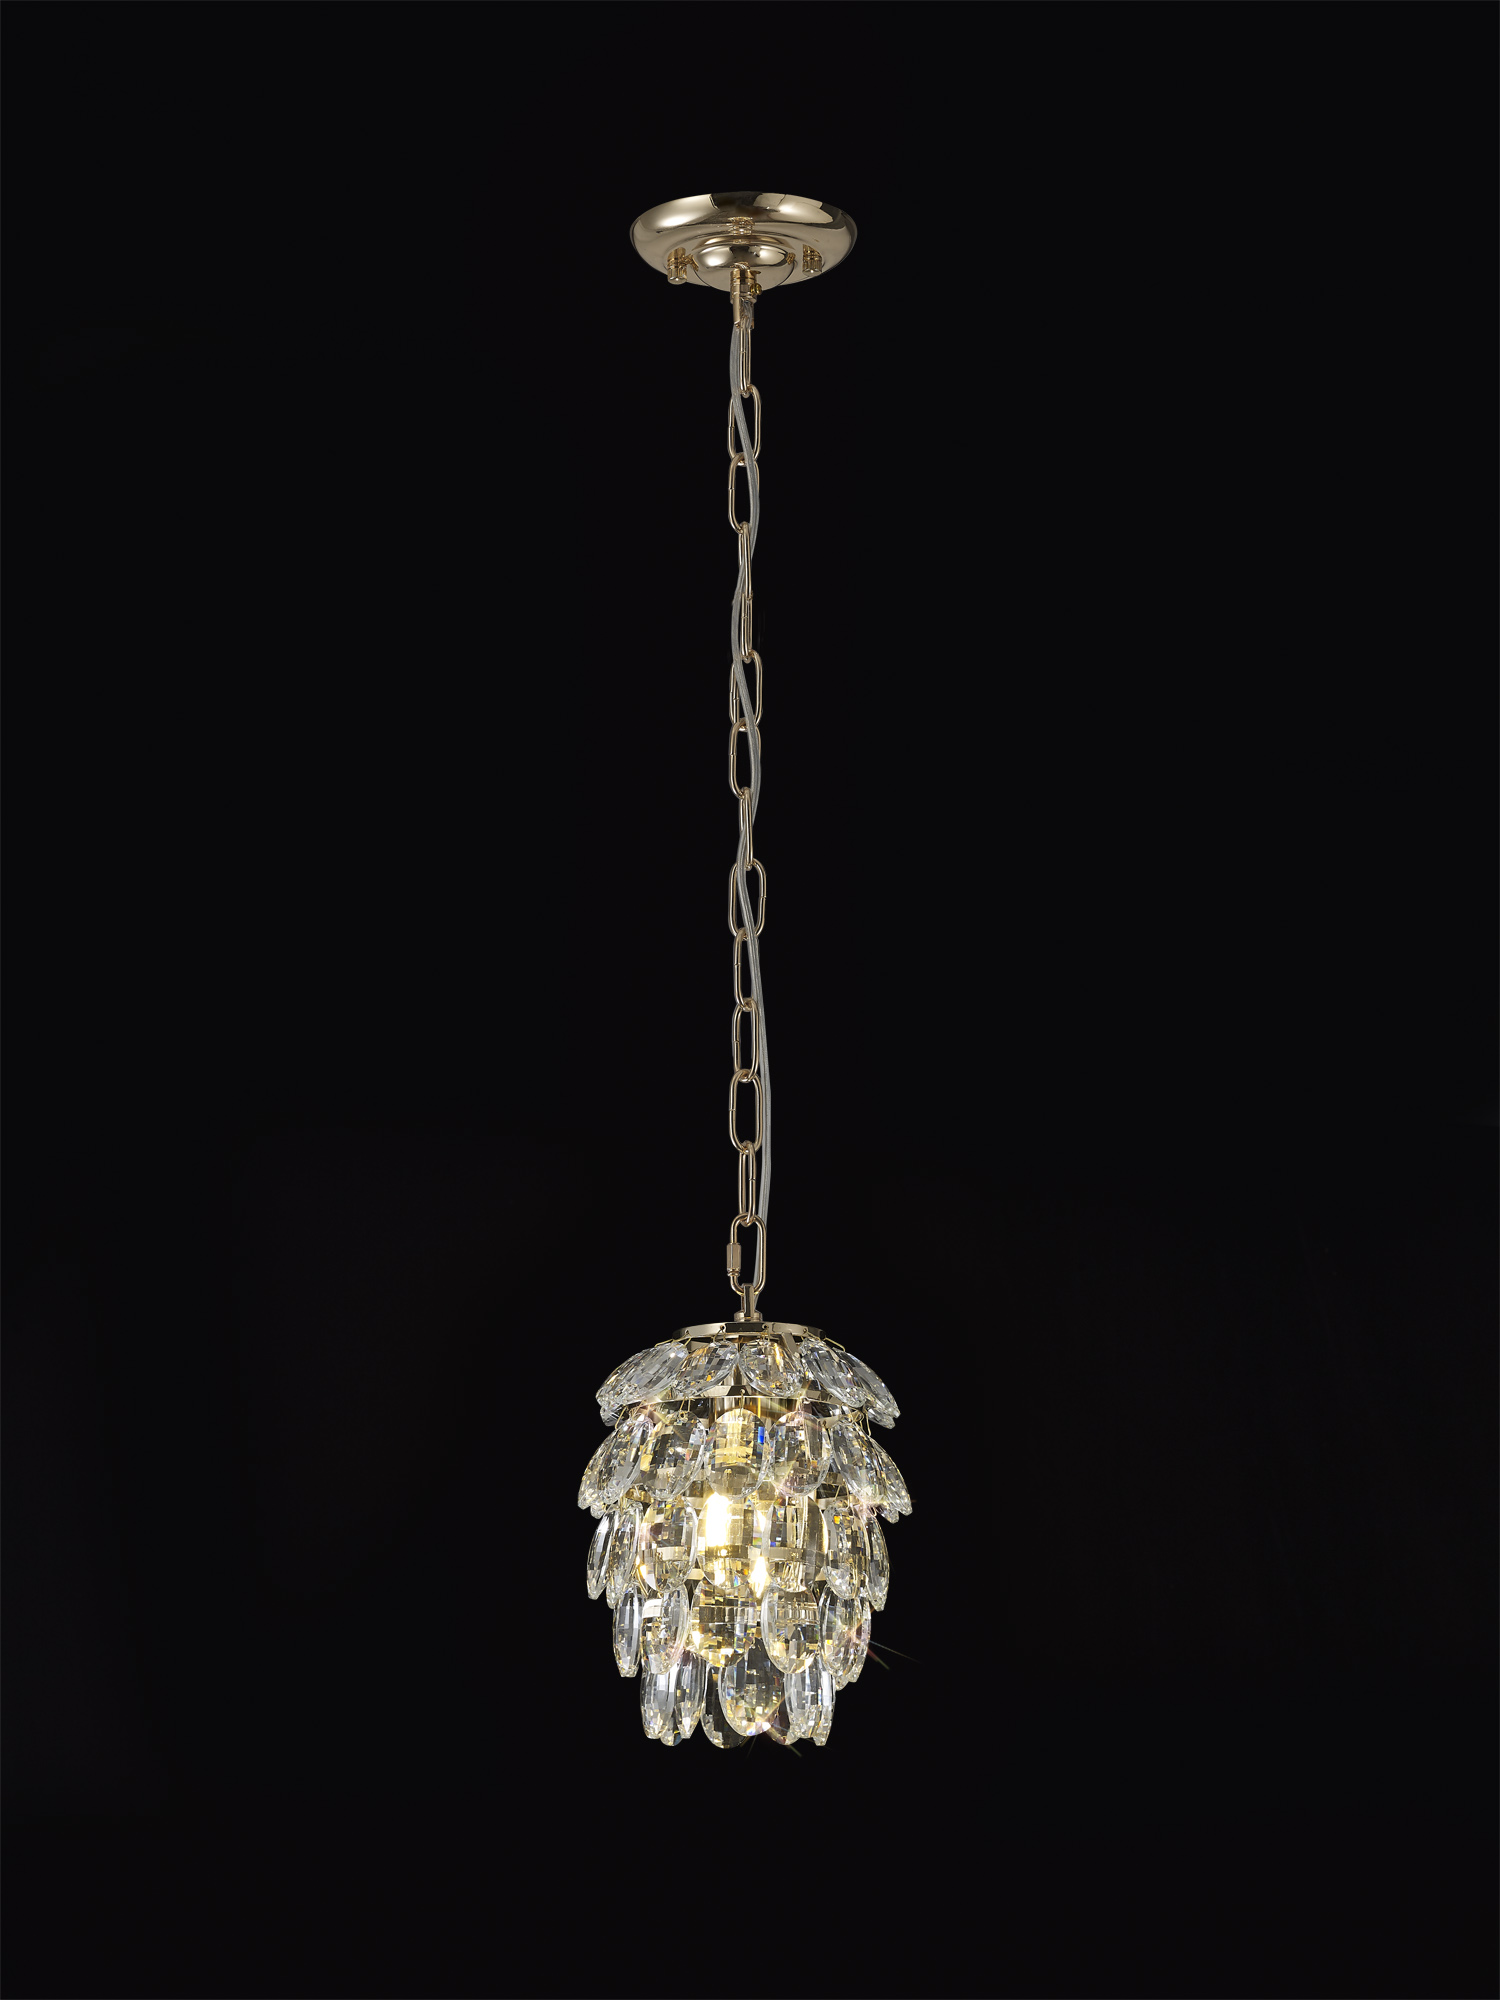 Coniston French Gold Crystal Ceiling Lights Diyas Single Crystal Pendants